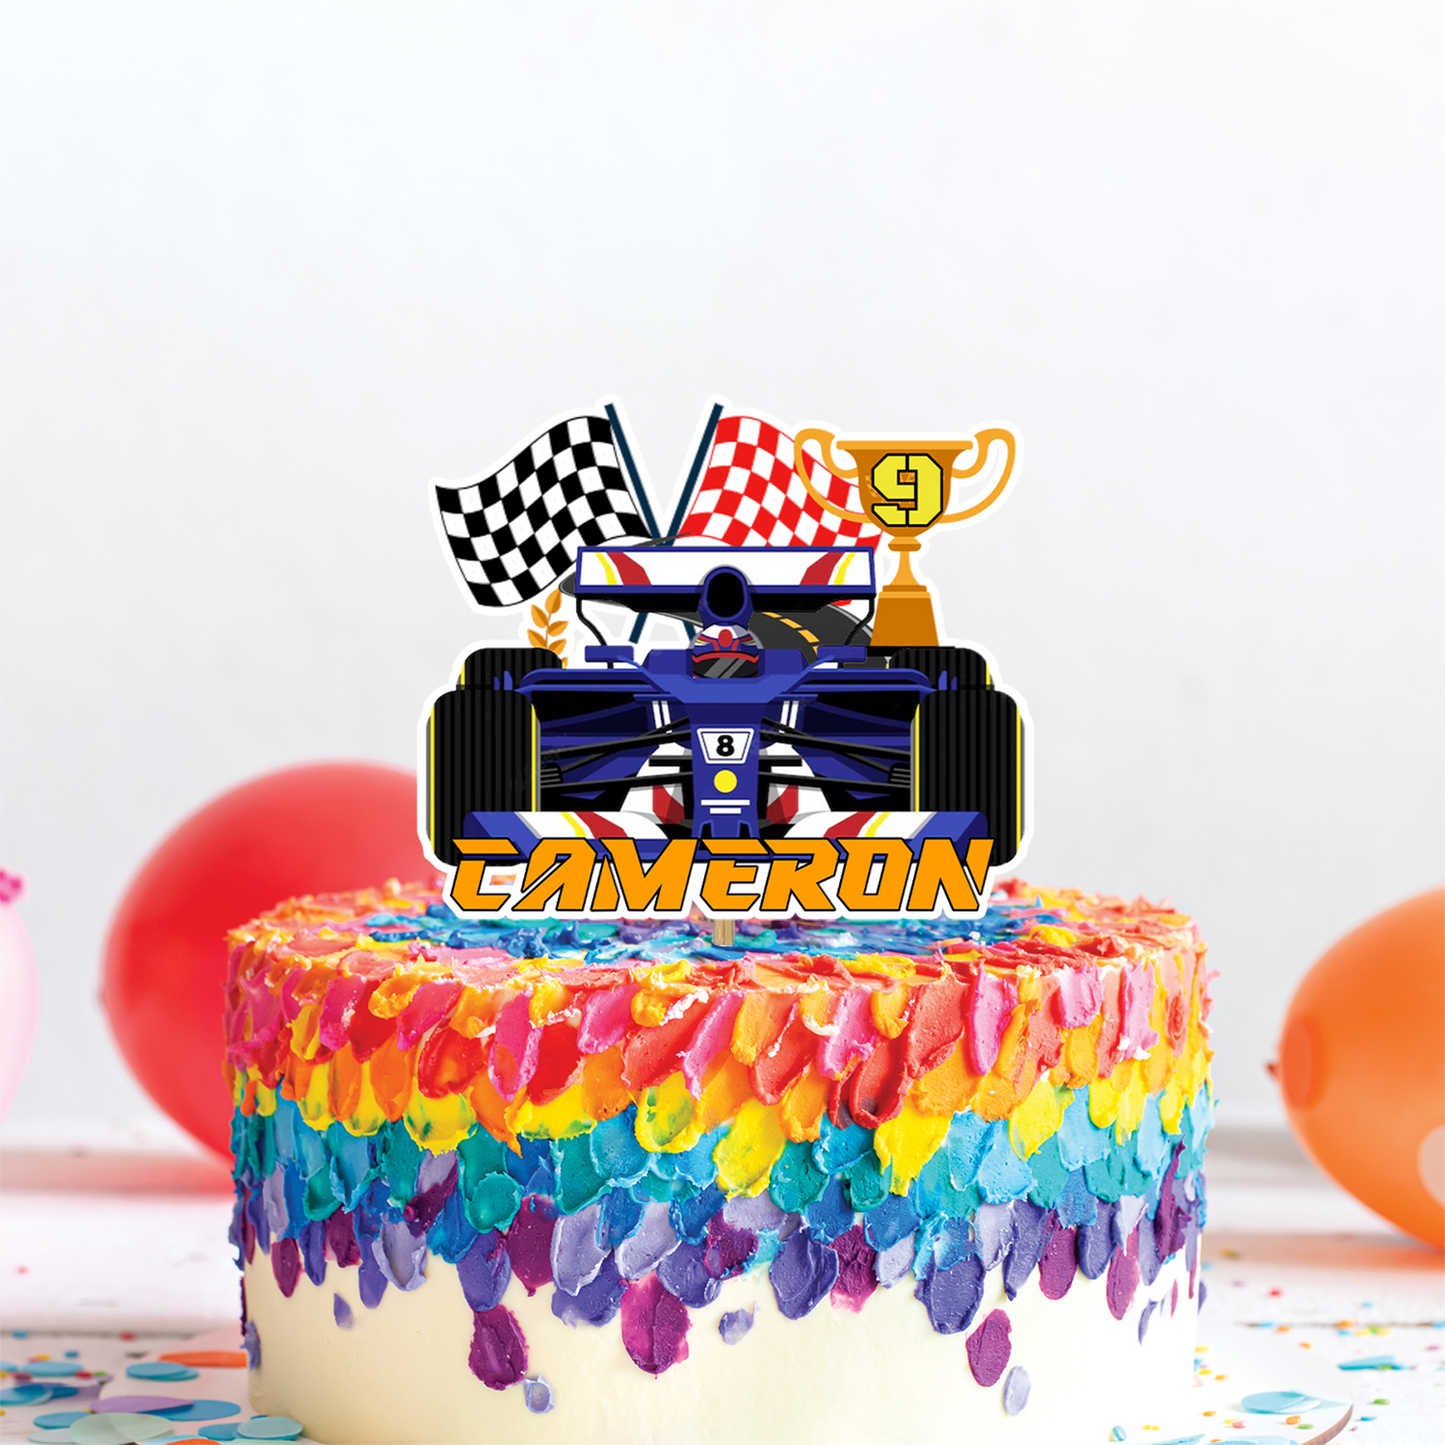 Personalized cake toppers with a Formula One theme